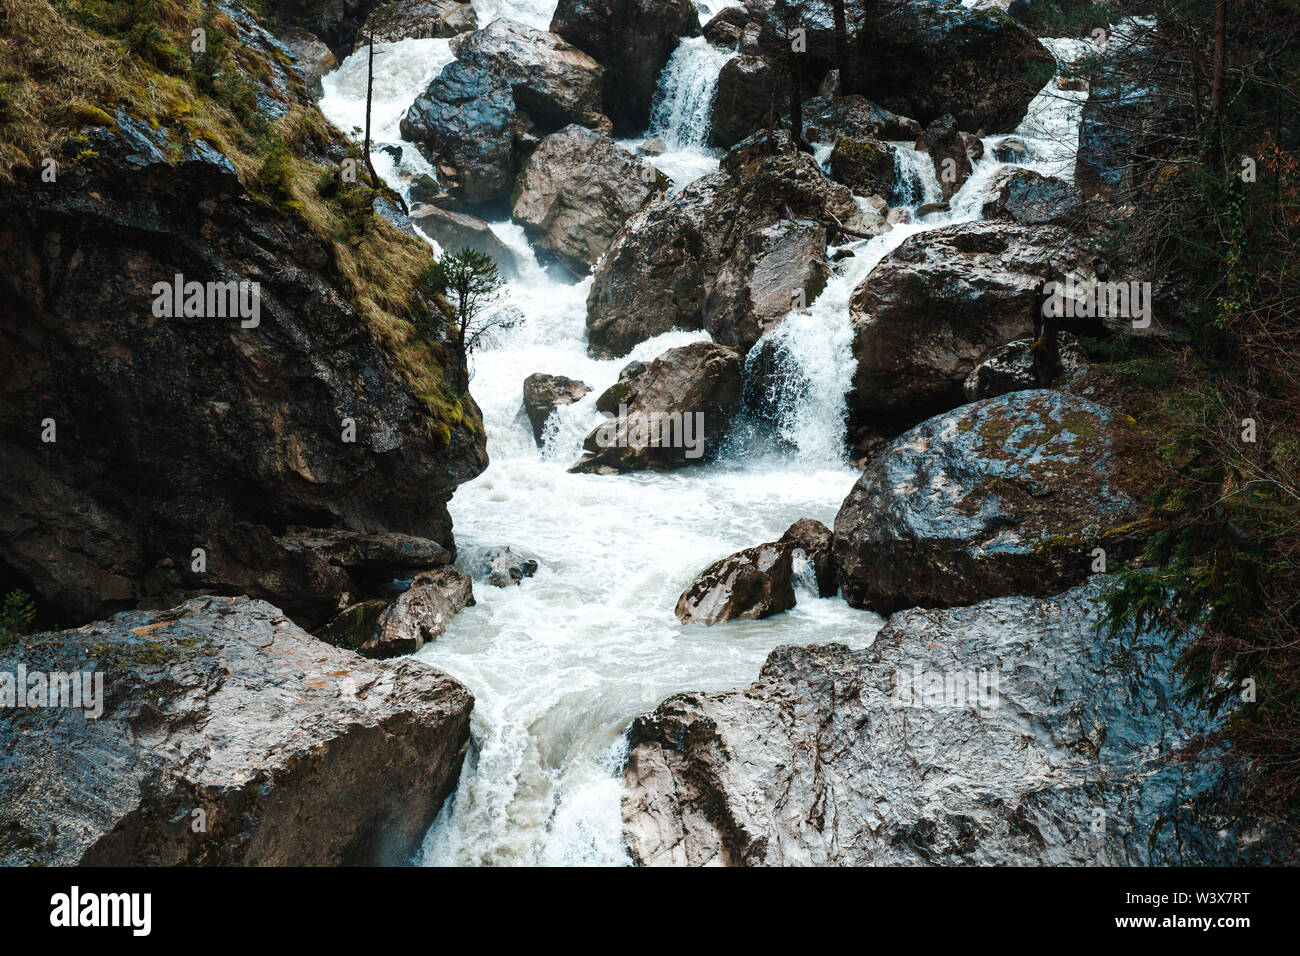 Small cliffy mountain spring waterfall in Abkhazia. Craggy ridge cliff with water bursts. Rocky mountains and waterfall rounded by trees. Stock Photo